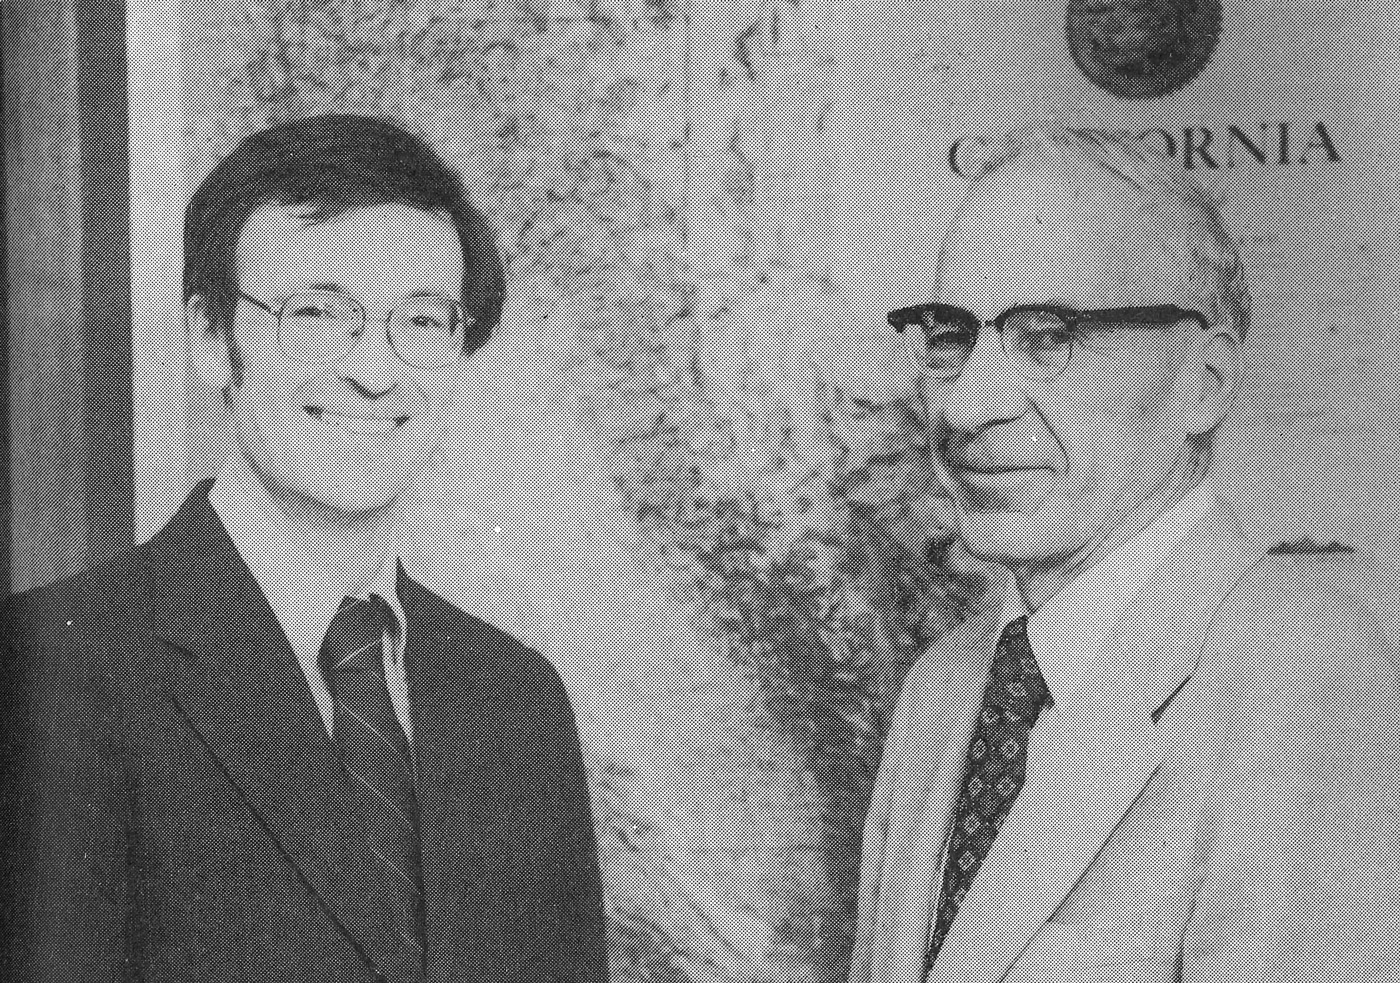 A black and white photo of two men smiling at the camera.